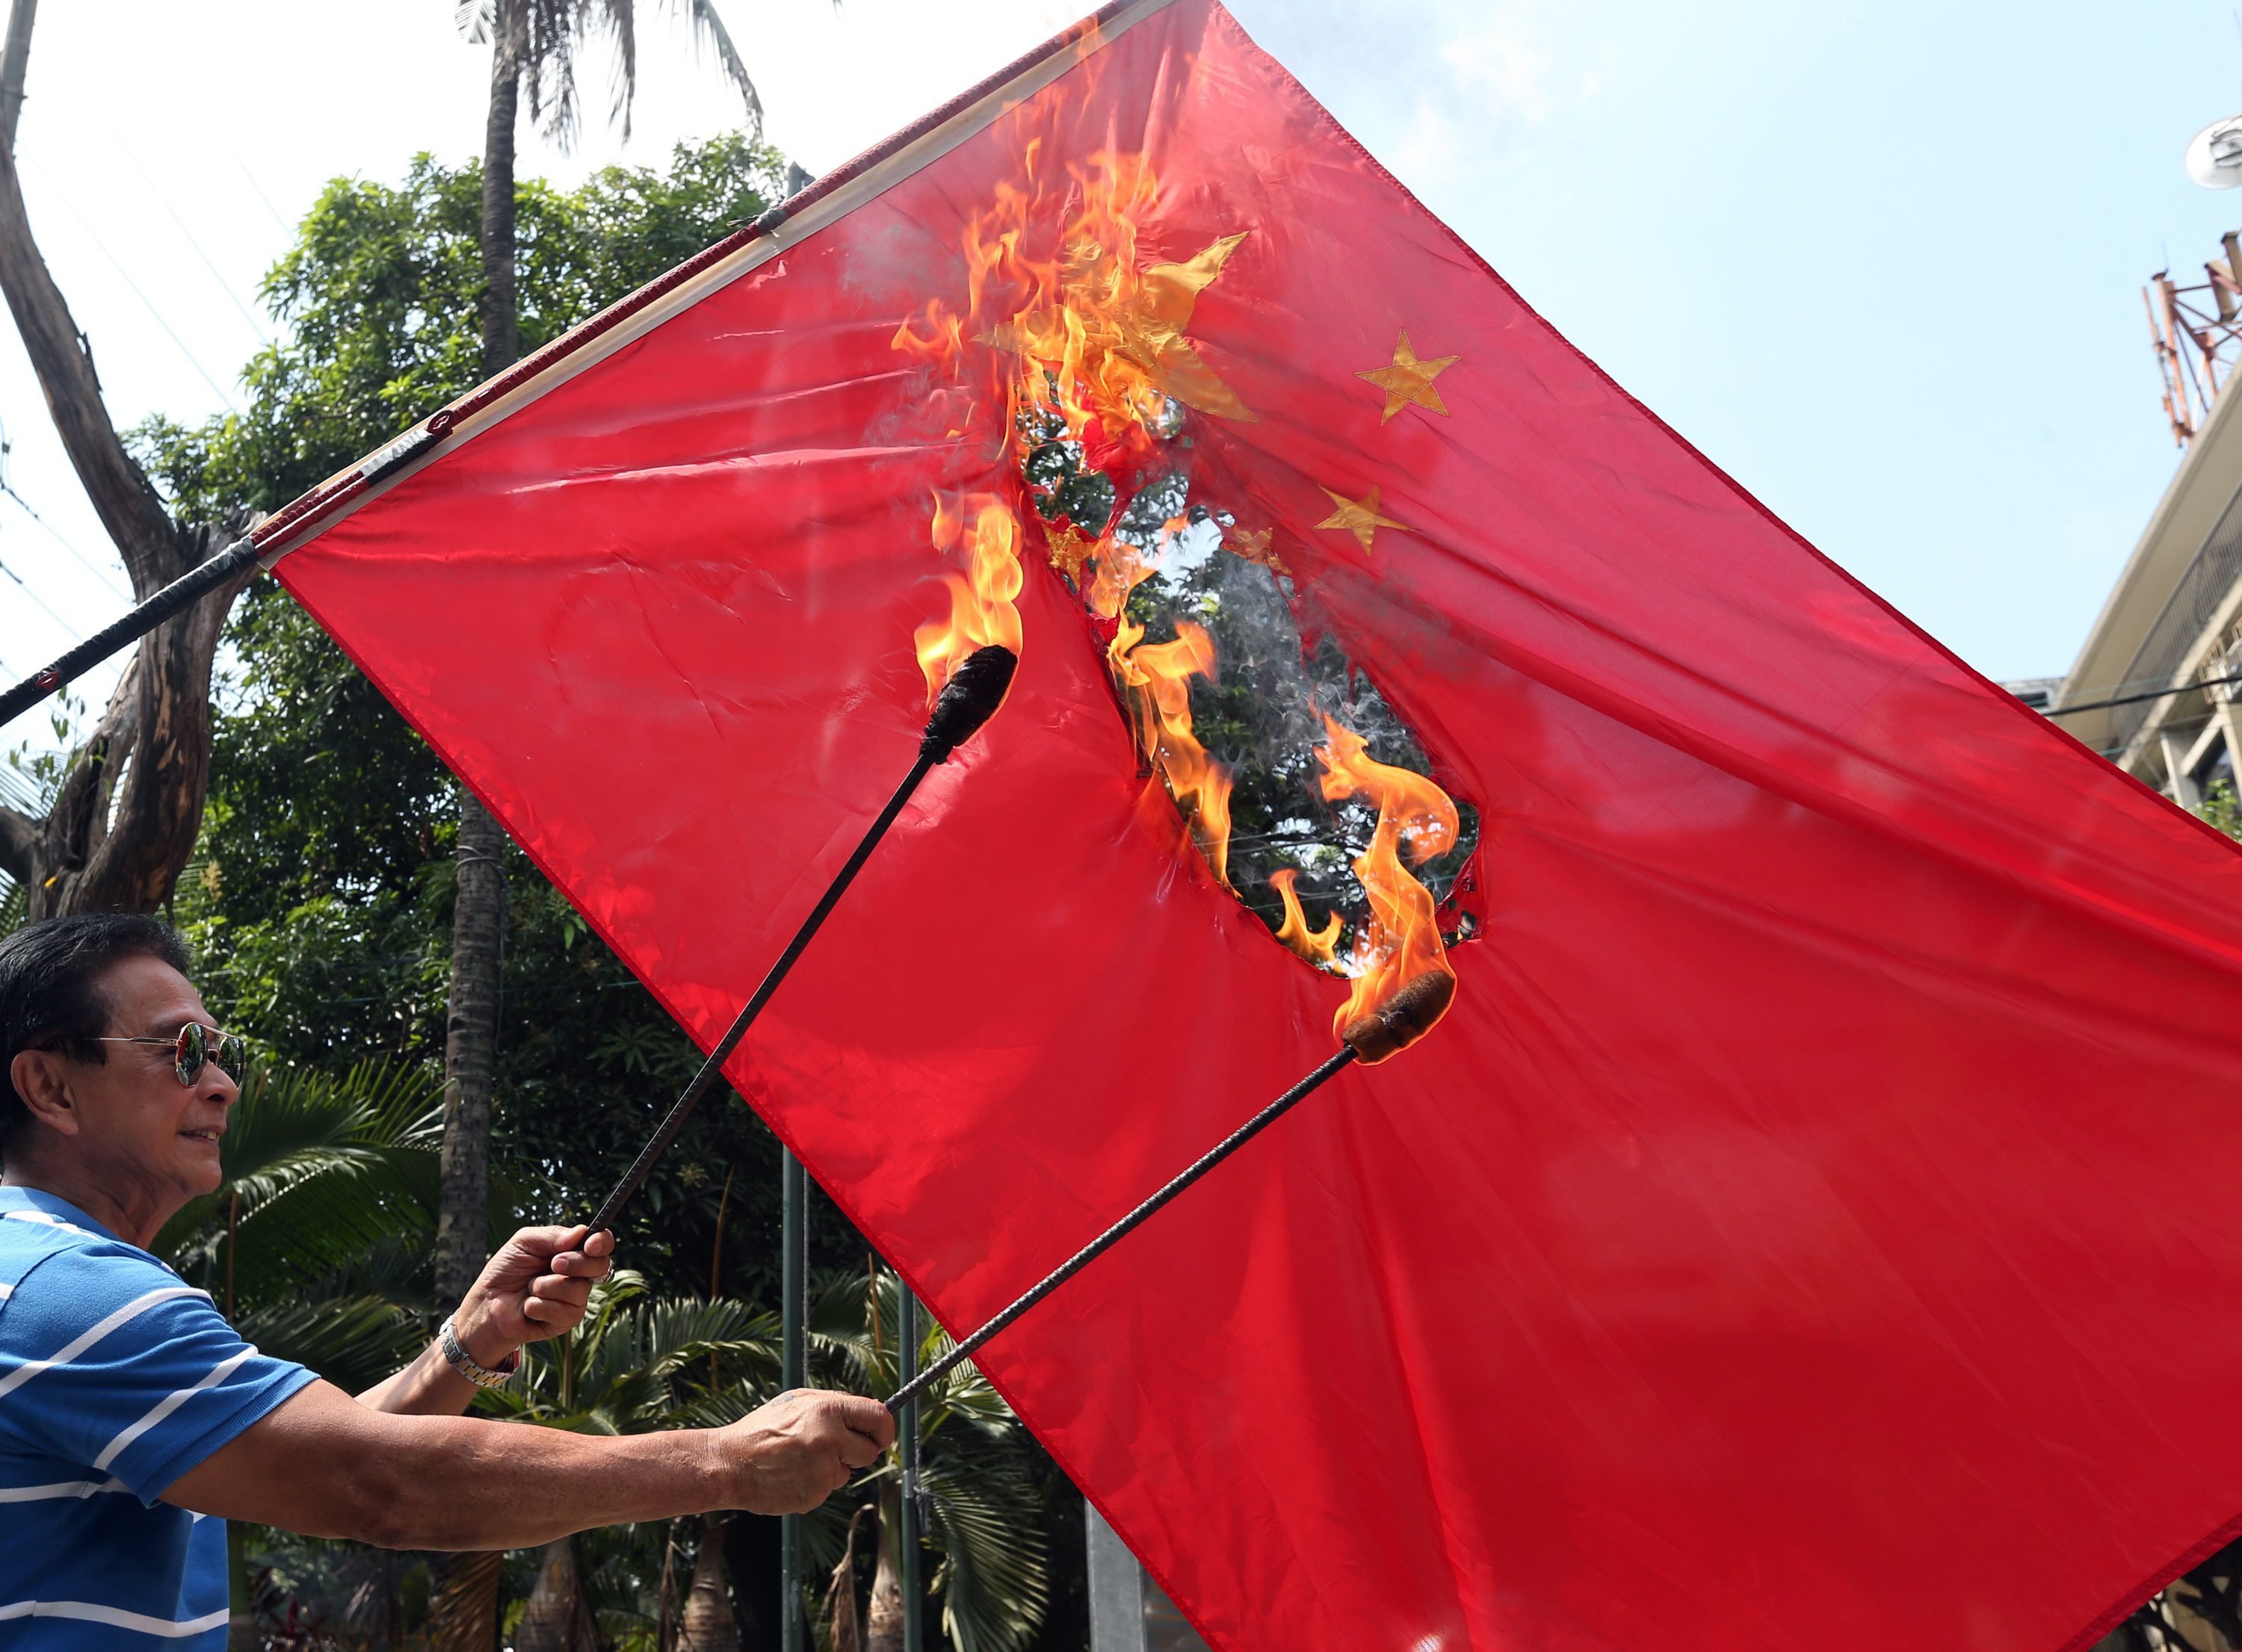 Filipino retired police officer and former town mayor Abner Afuang burns a Chinese flag, in protest over territorial disputes at a shoal in the South China Sea. Photo: EPA